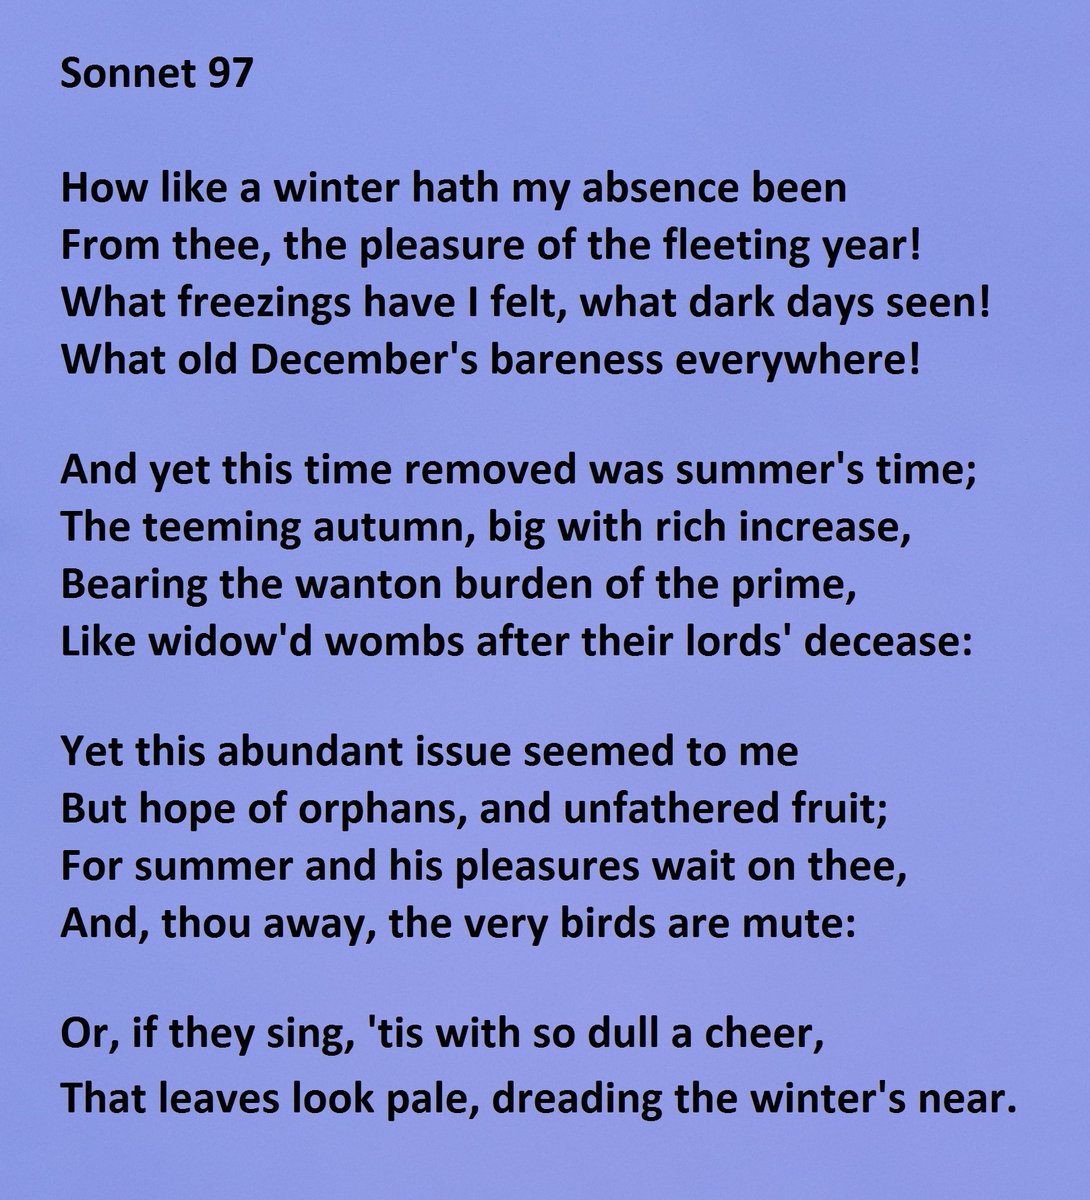 Sonnet 97 by William Shakespeare "How like a winter hath my absence been"